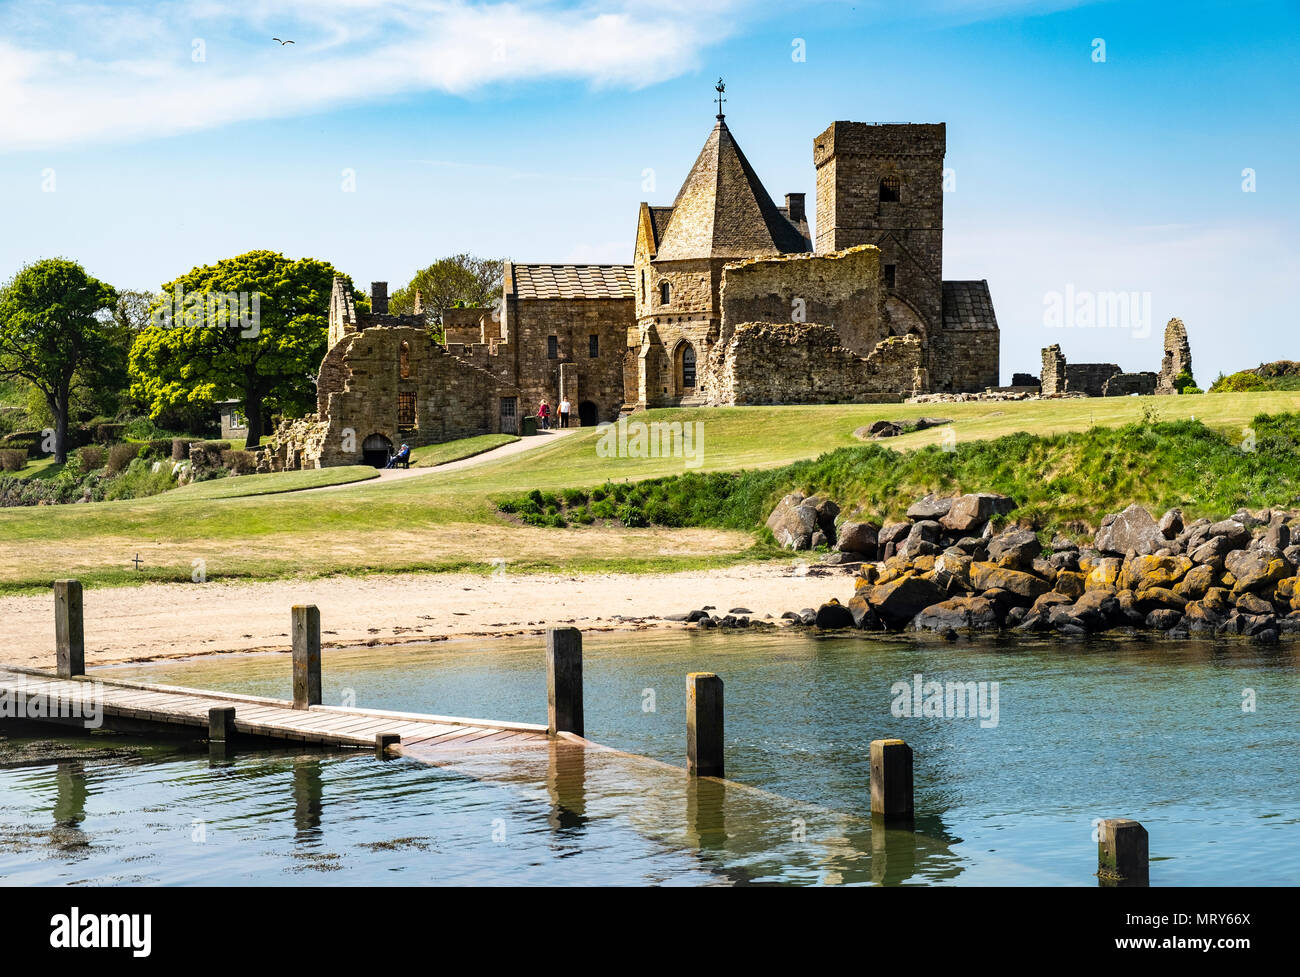 View of Inchcolm Abbey on Inchcolm Island in on the Firth of Forth river in Scotland, UK, United Kingdom Stock Photo